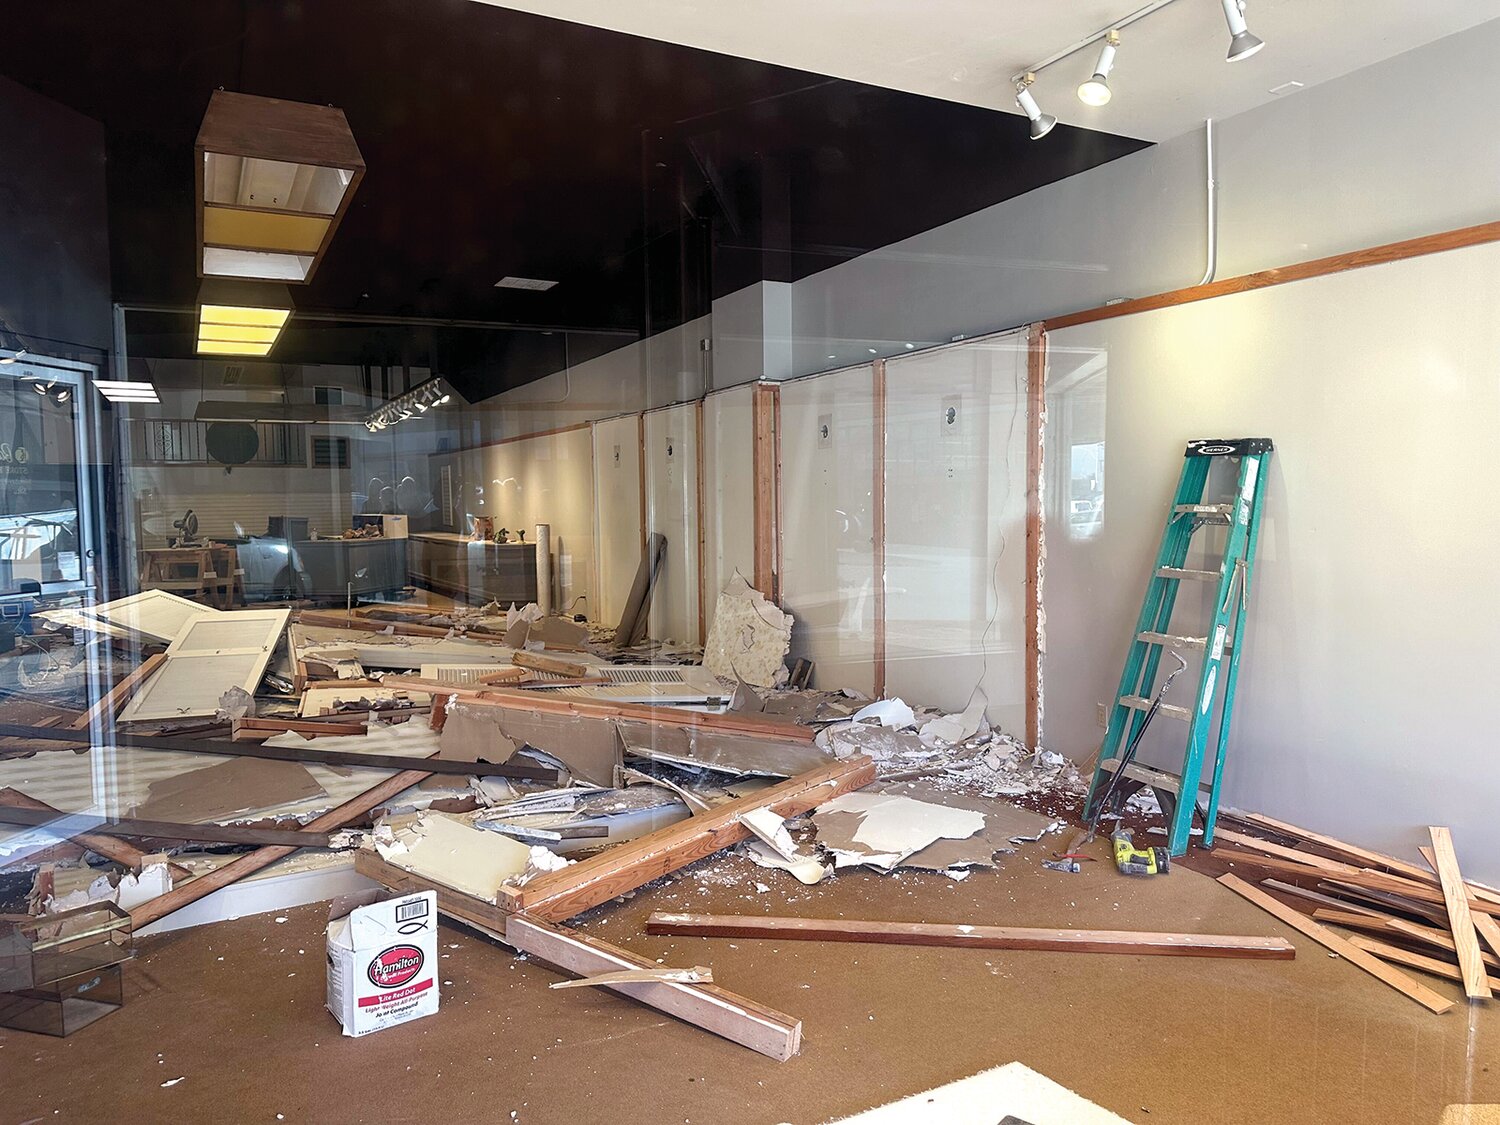 Once the Northwest Salmon Smokehouse is open, it will be located at 486 N. Market Blvd in Chehalis. The space is pictured here while under renovations last month.